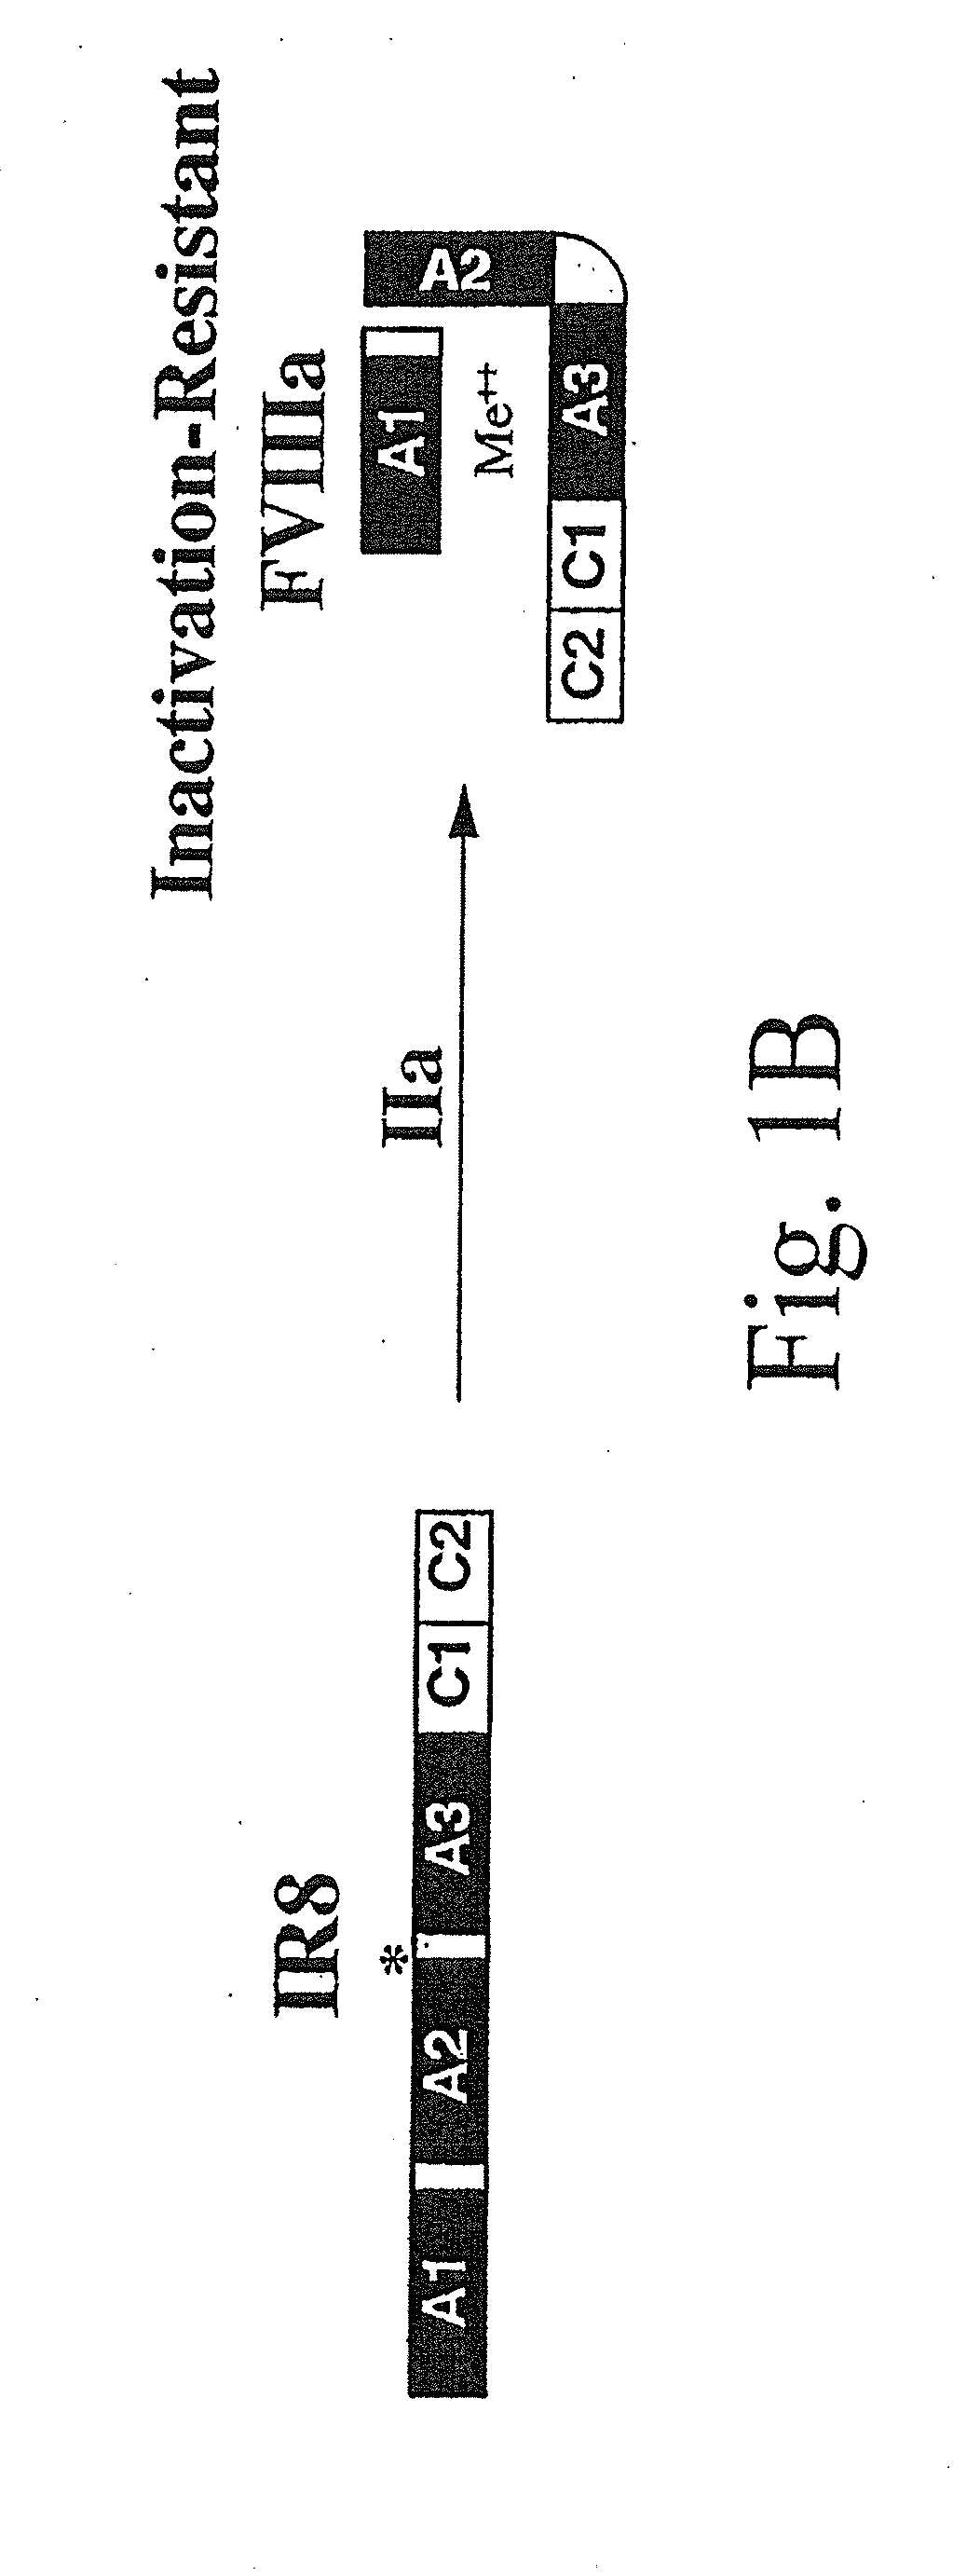 Method of producing factor viii proteins by recombinant methods